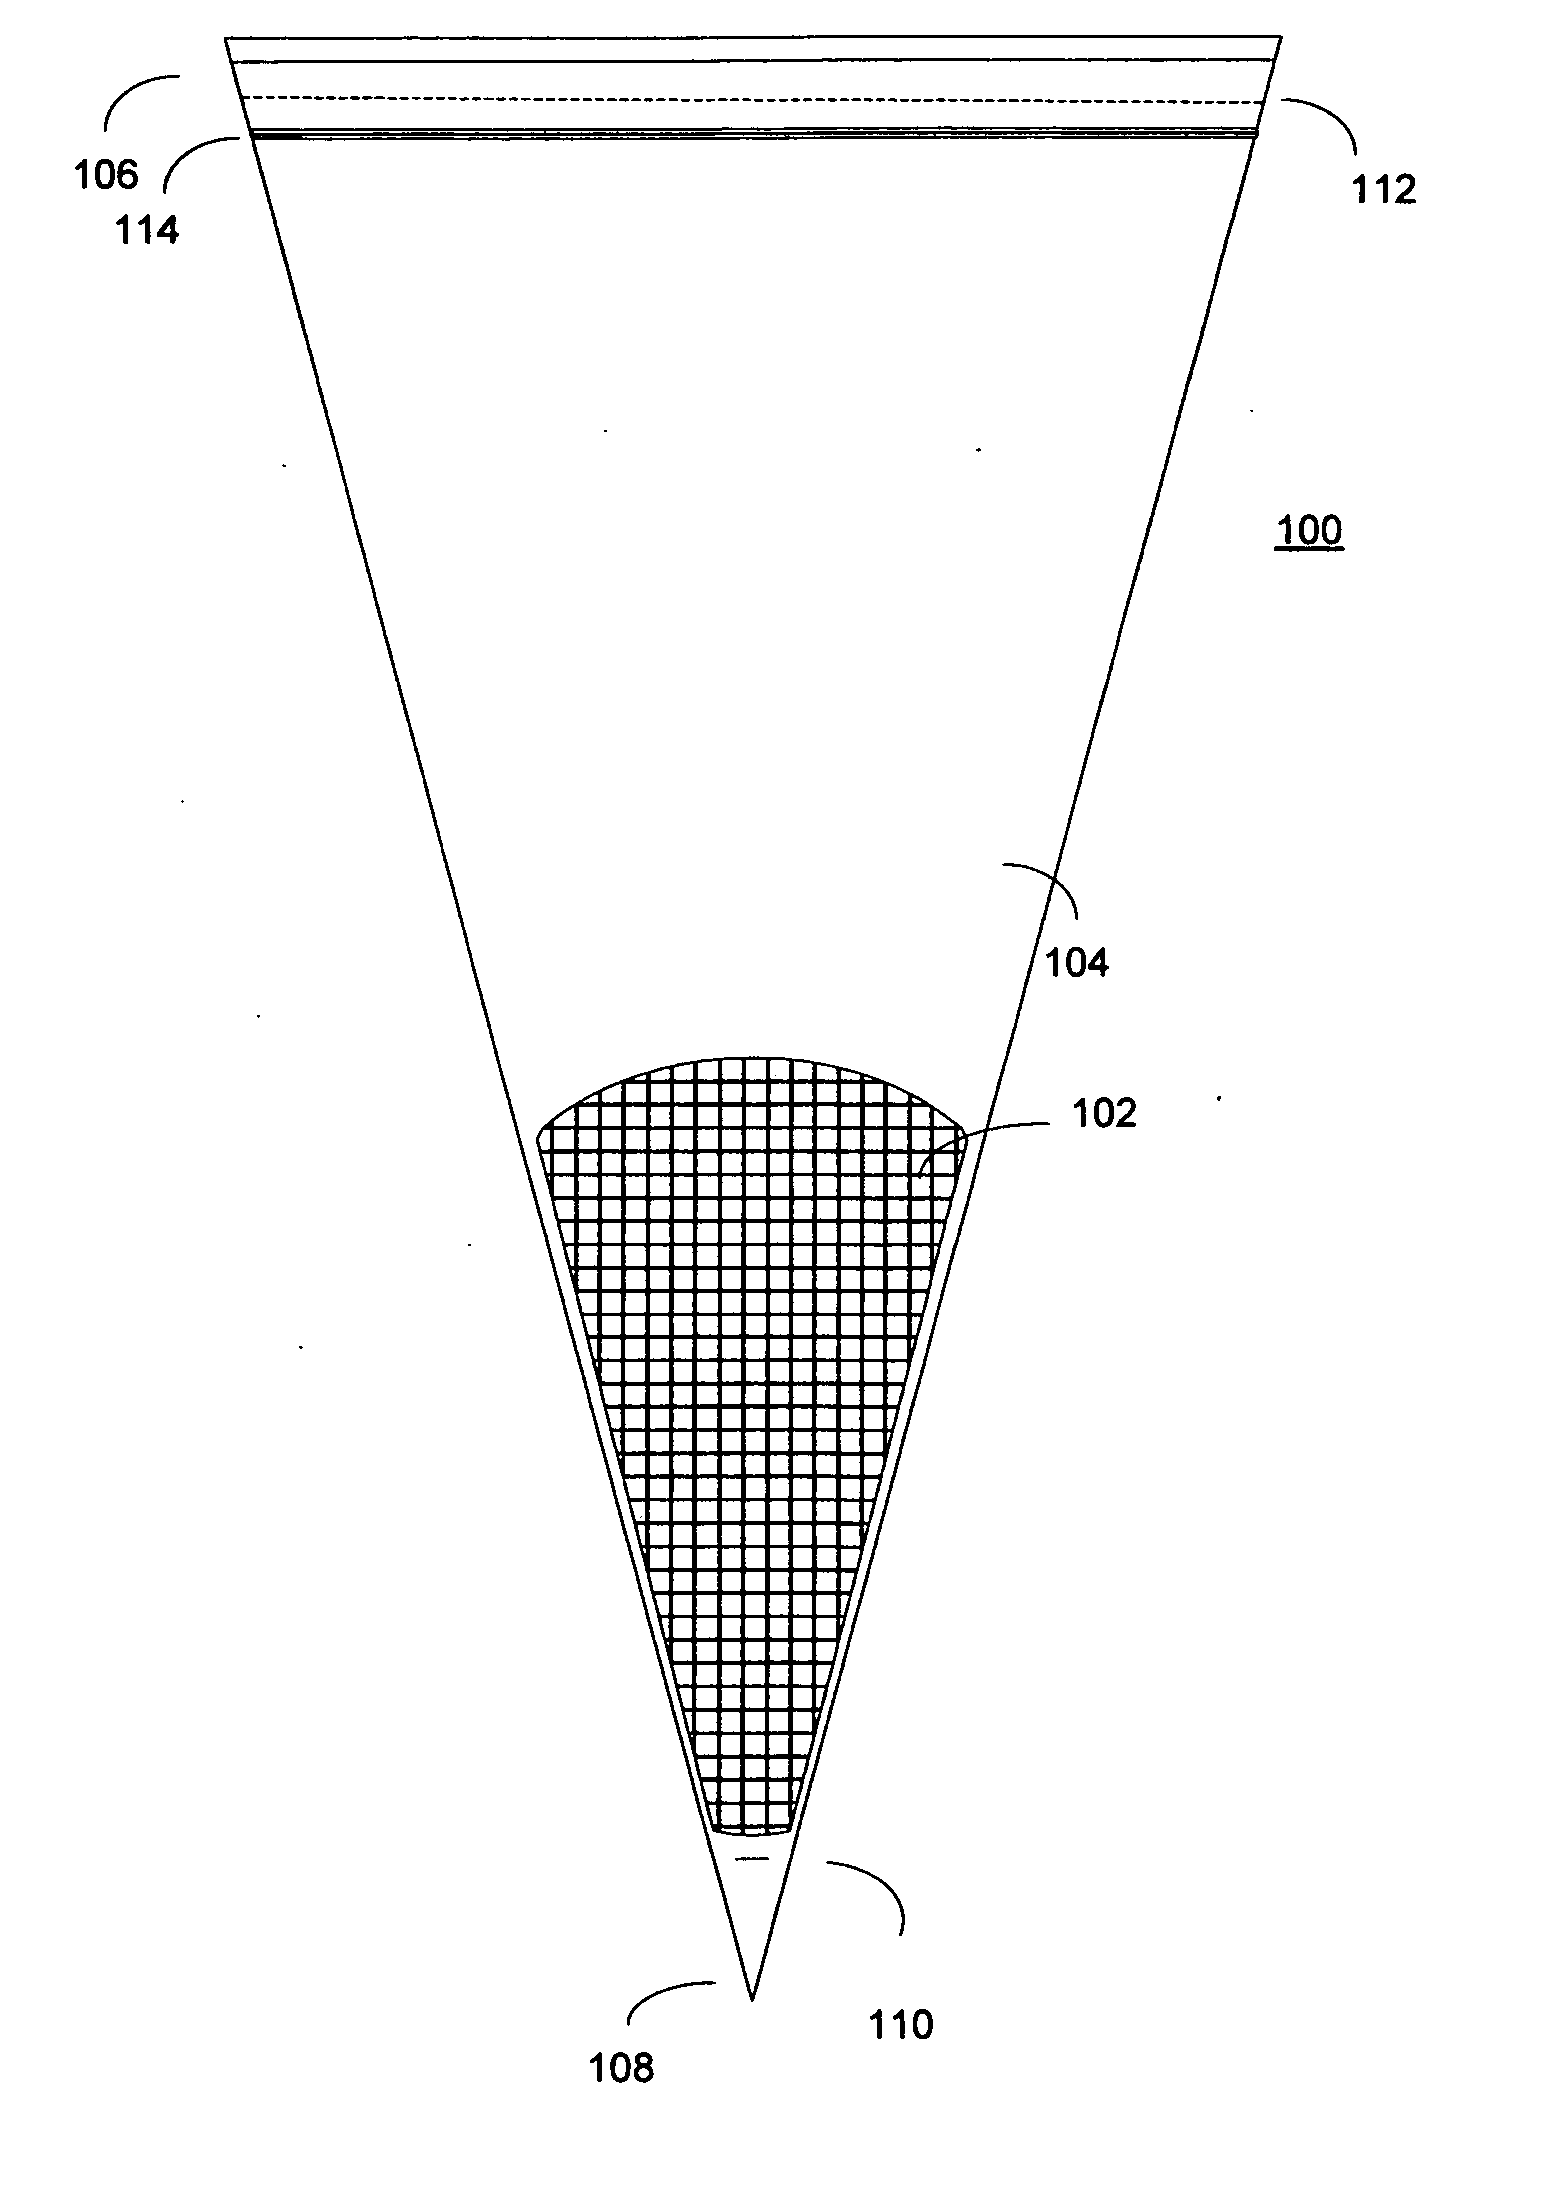 System and method of preparing frozen baking items